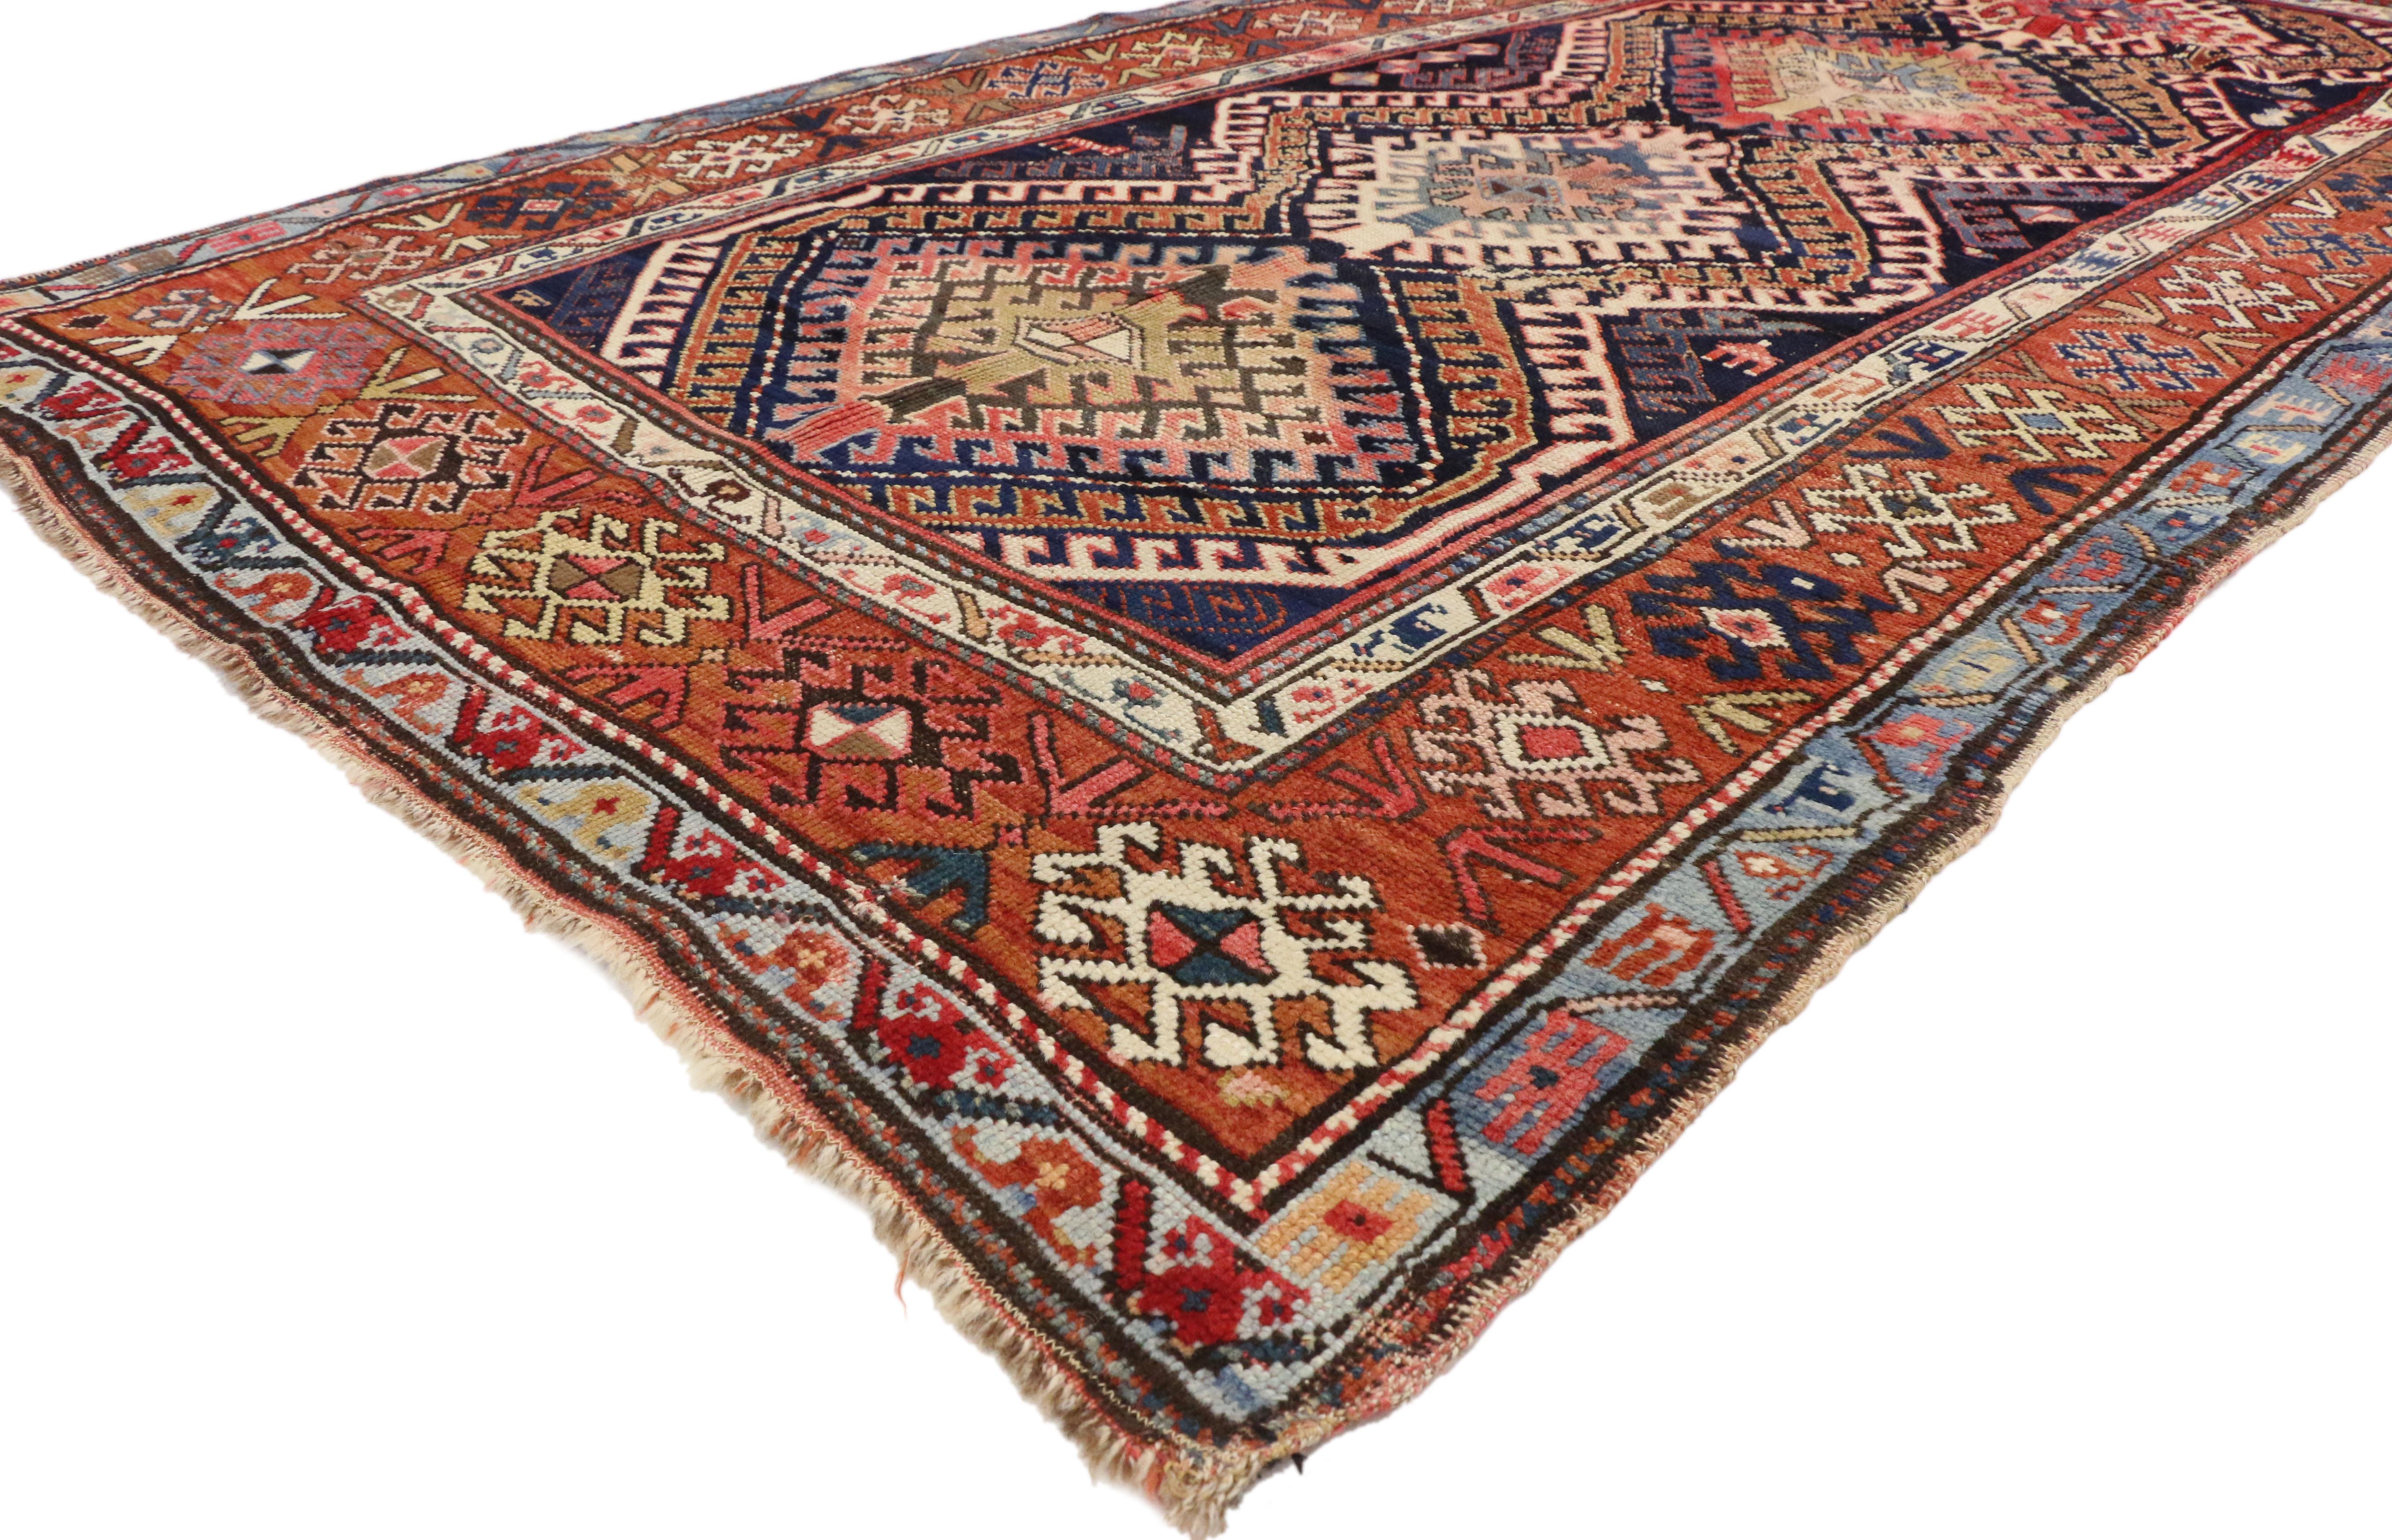 70950 Rustic Tribal Style Antique Caucasian Bordjalou Kazak Rug, Wide Hallway Runner 04'00 x 07'11.​ Based on traditional designs from the Caucasus region, this hand-knotted wool antique Bordjalou Kazak rug features four latch hook scorpion